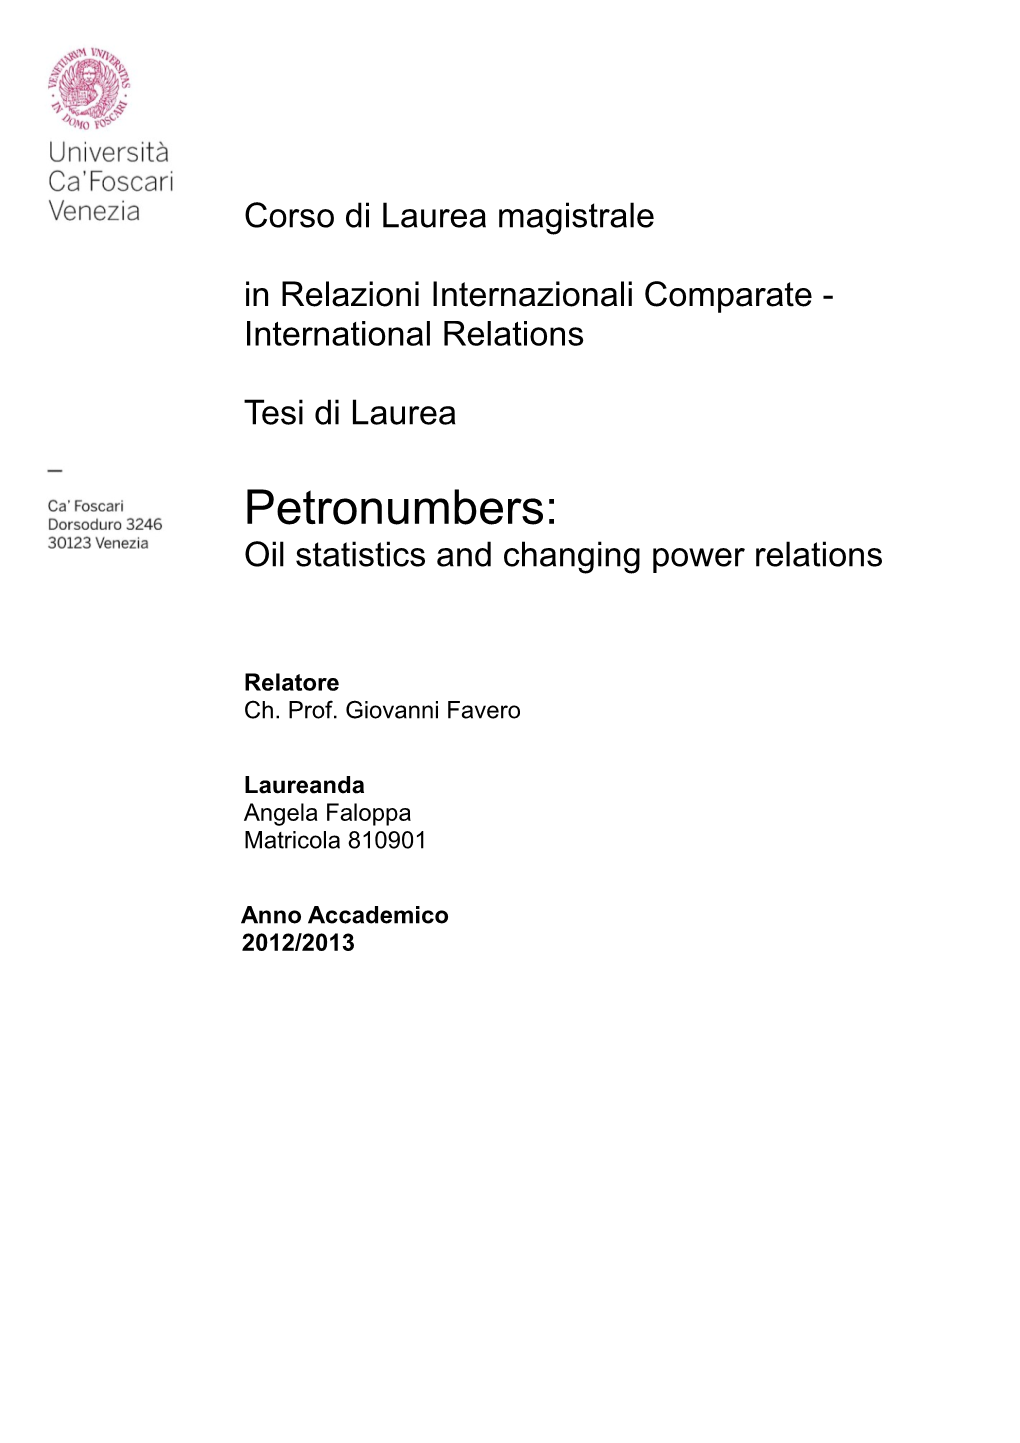 Petronumbers: Oil Statistics and Changing Power Relations